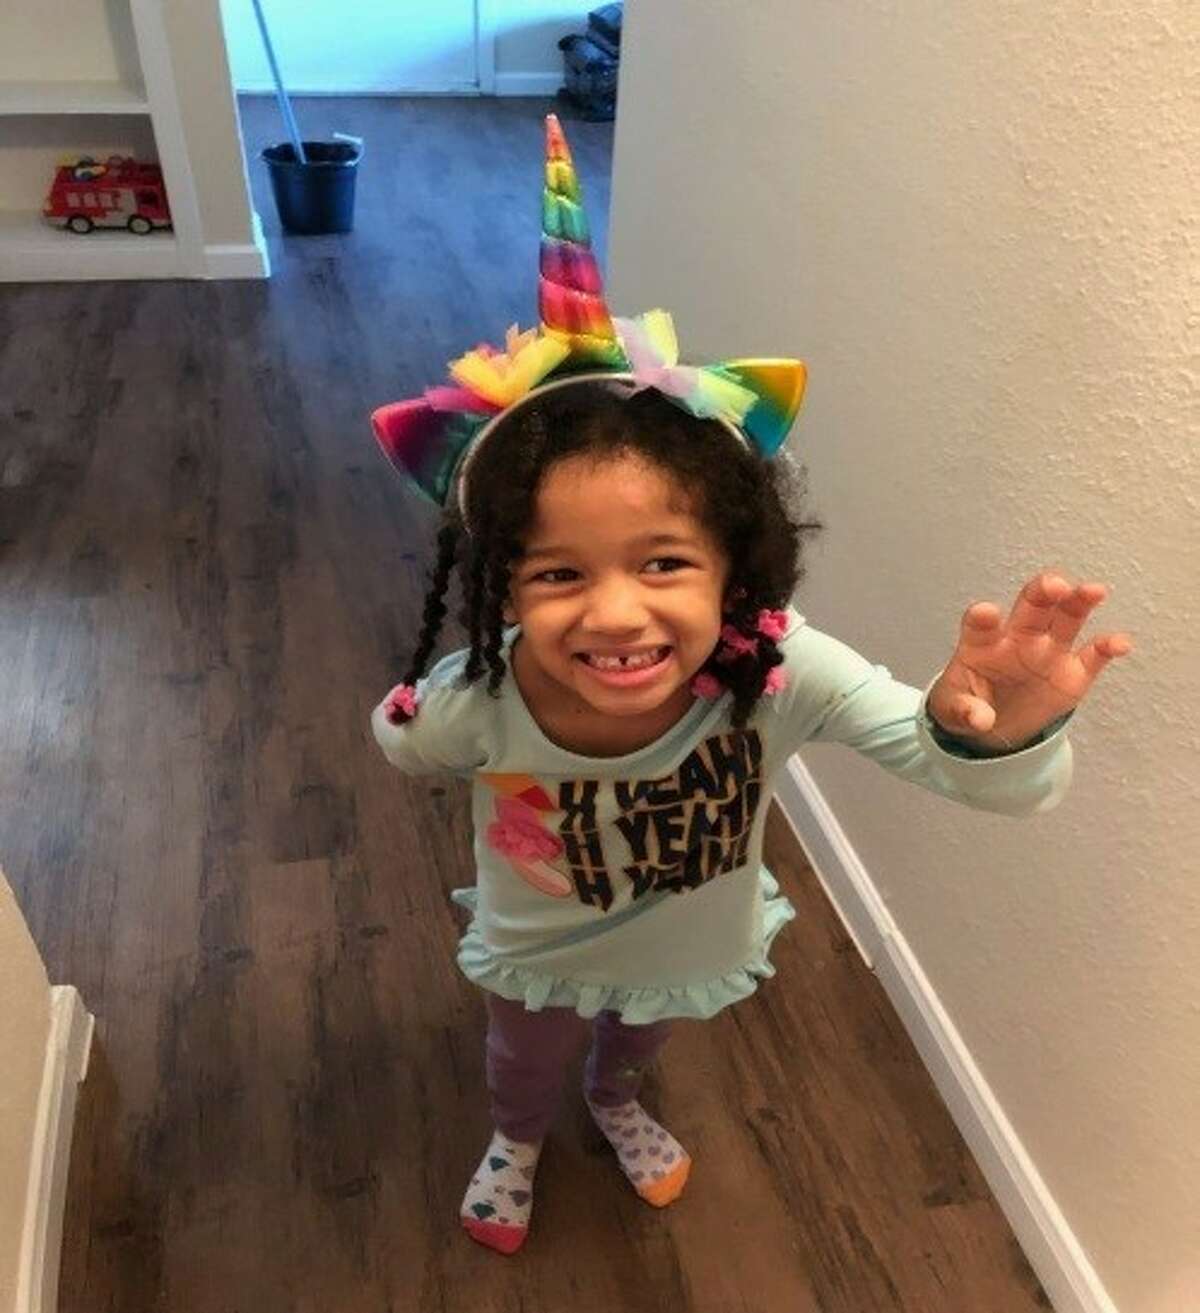 TIMELINE: See how the events surrounding the disappearance of 4-year-old Maleah Davis unfolded >>>